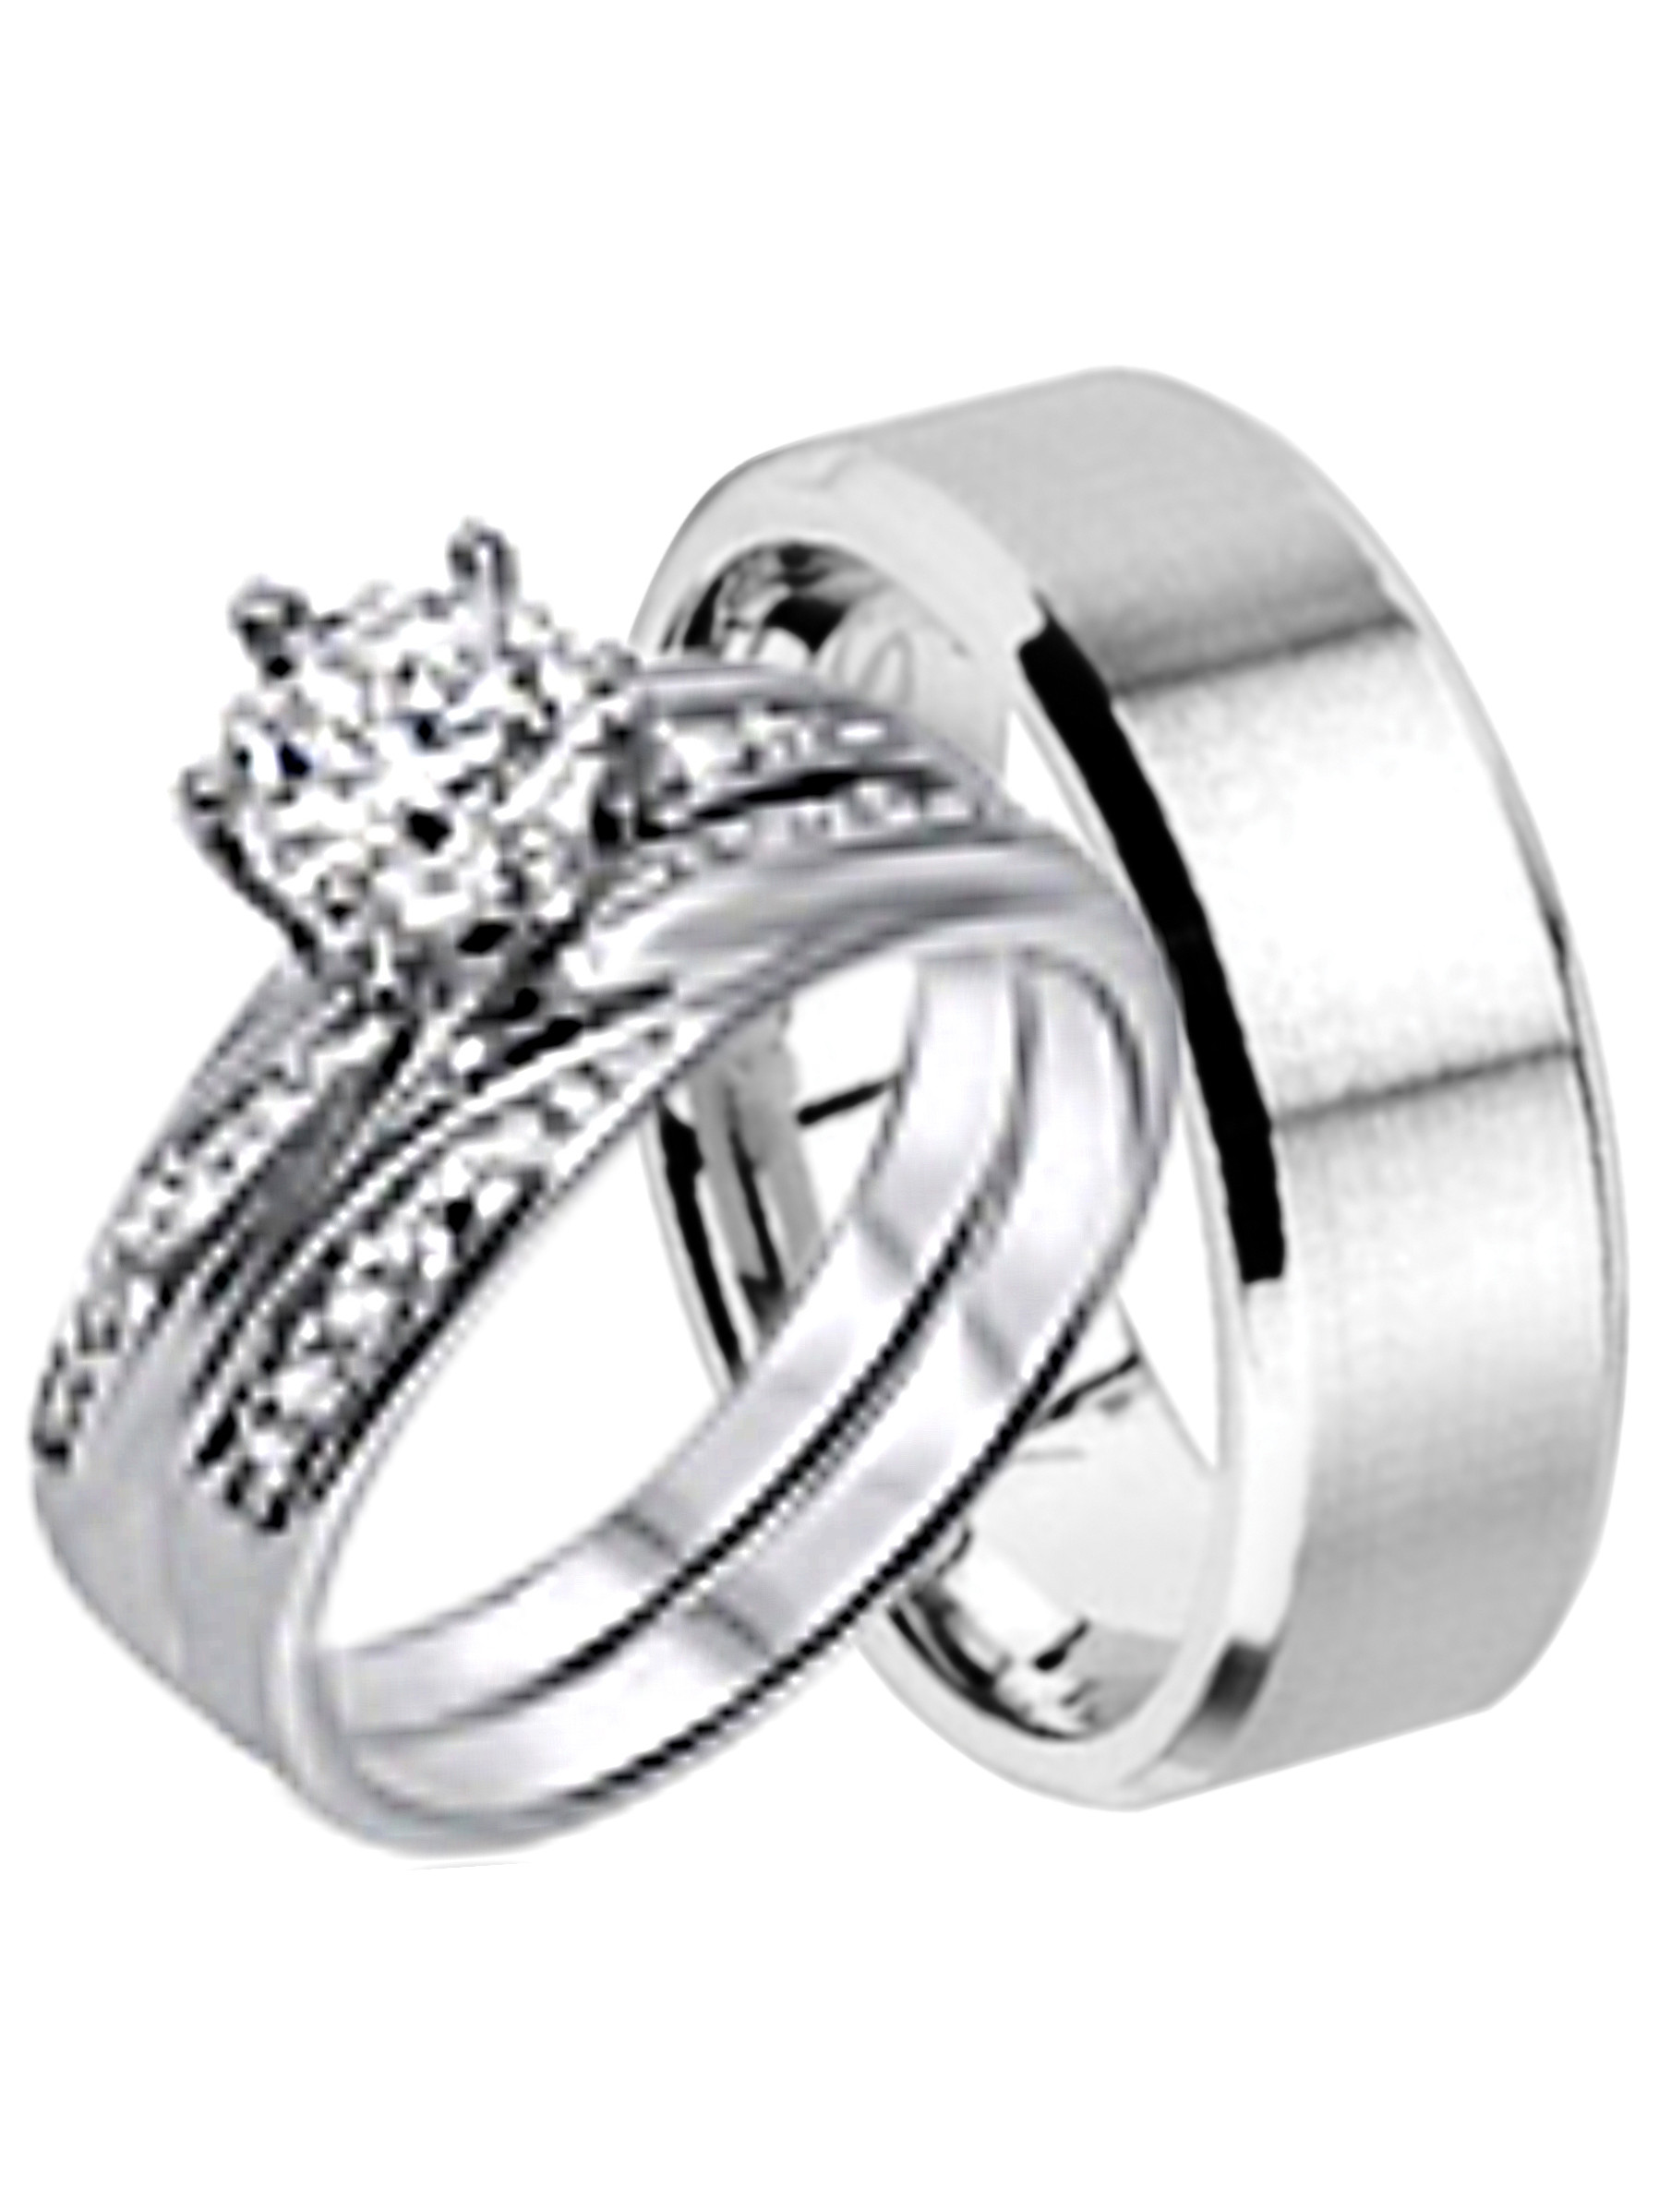 Walmart Wedding Rings Sets For Him And Her
 His and Hers Wedding Ring Set Matching Wedding Bands for